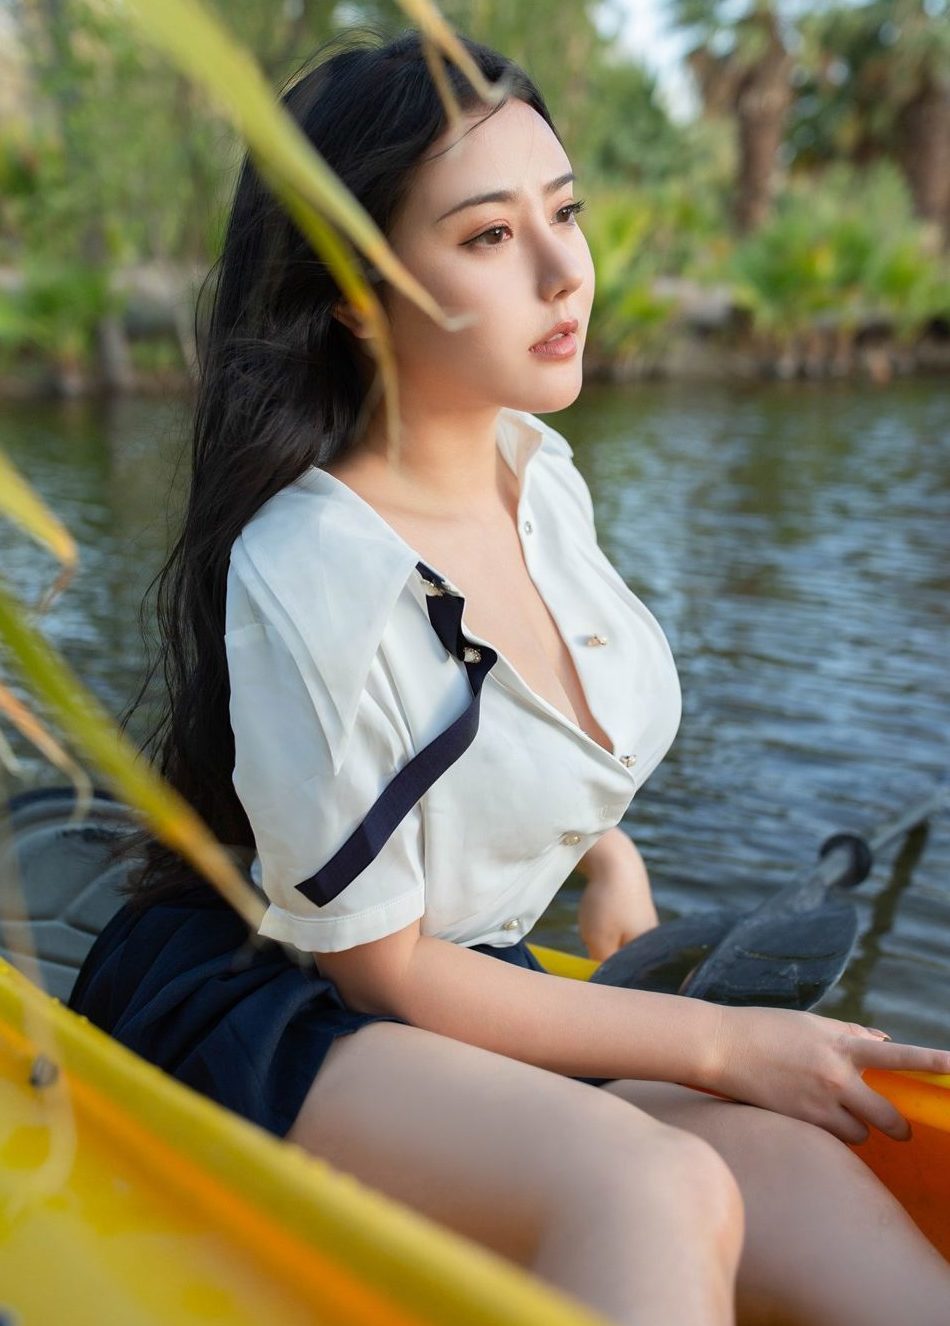 Naughty Students Gets Kinky and gets naked on A Boat Ride 